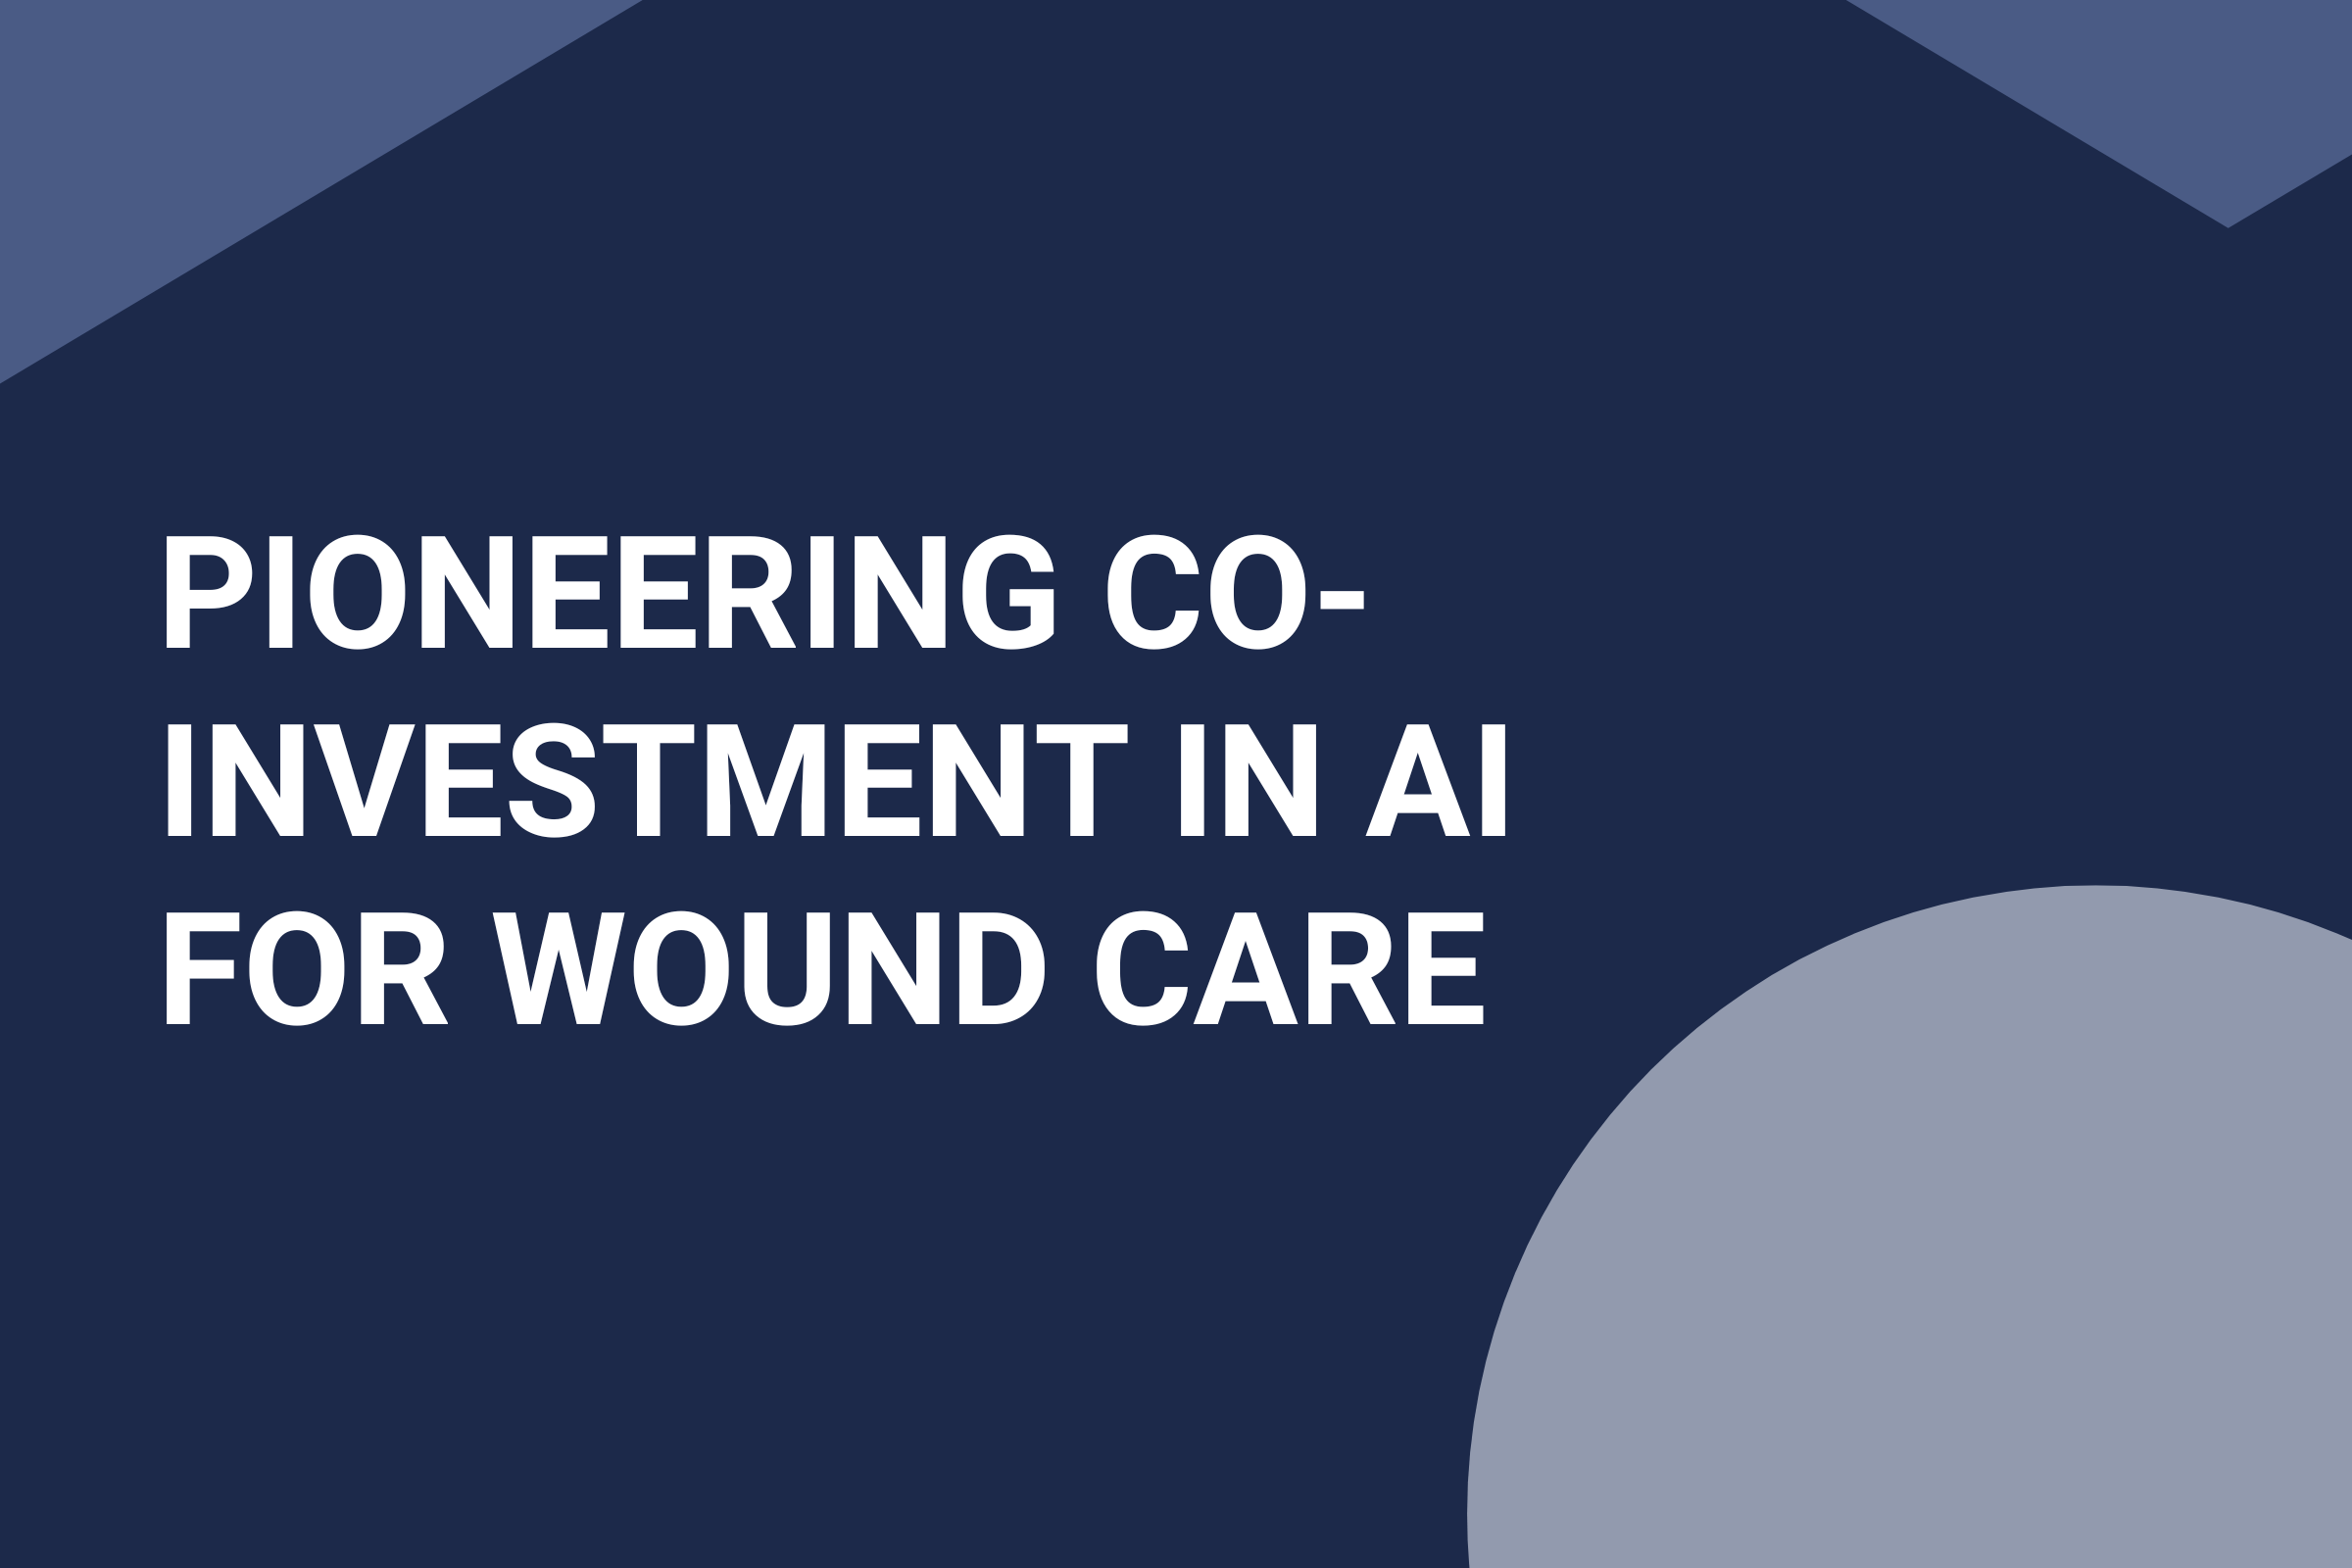 Pioneering co-investment in AI for wound care